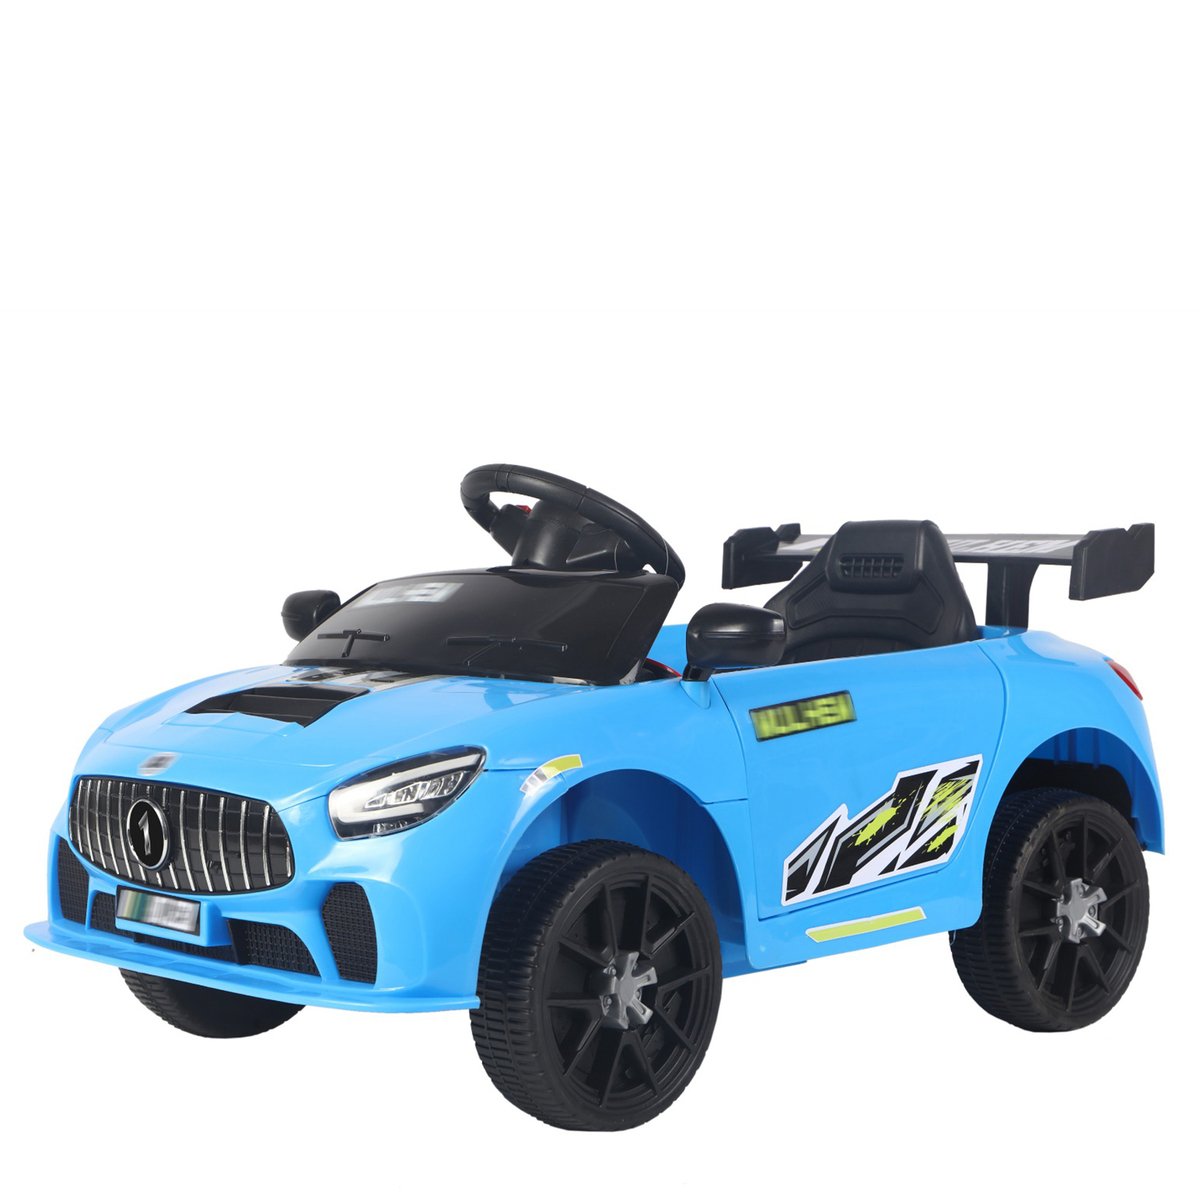 Skid Fusion Rechargeable Kids Motor Car 3290026-2R Assorted